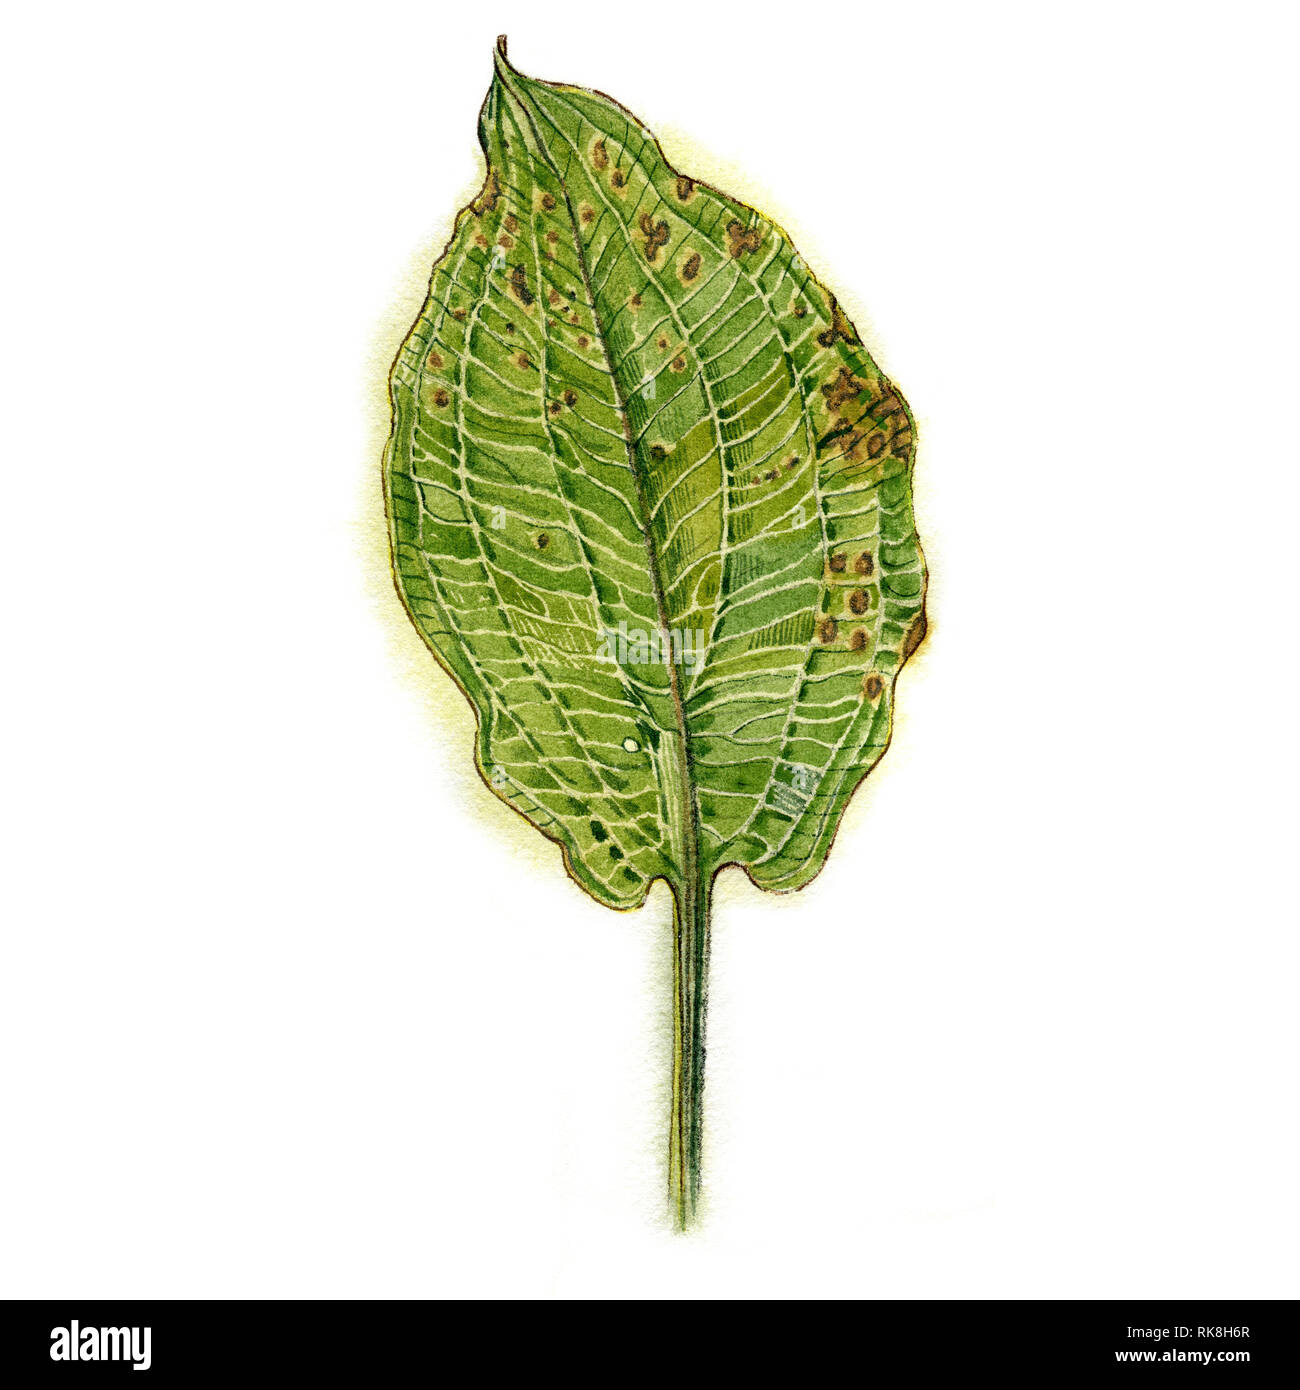 Water plant leaf. Alisma plantago-aquatica or water-plantain, or mad-dog weed. Hand drawn watercolor painting. Botanical illustration isolated on whit Stock Photo